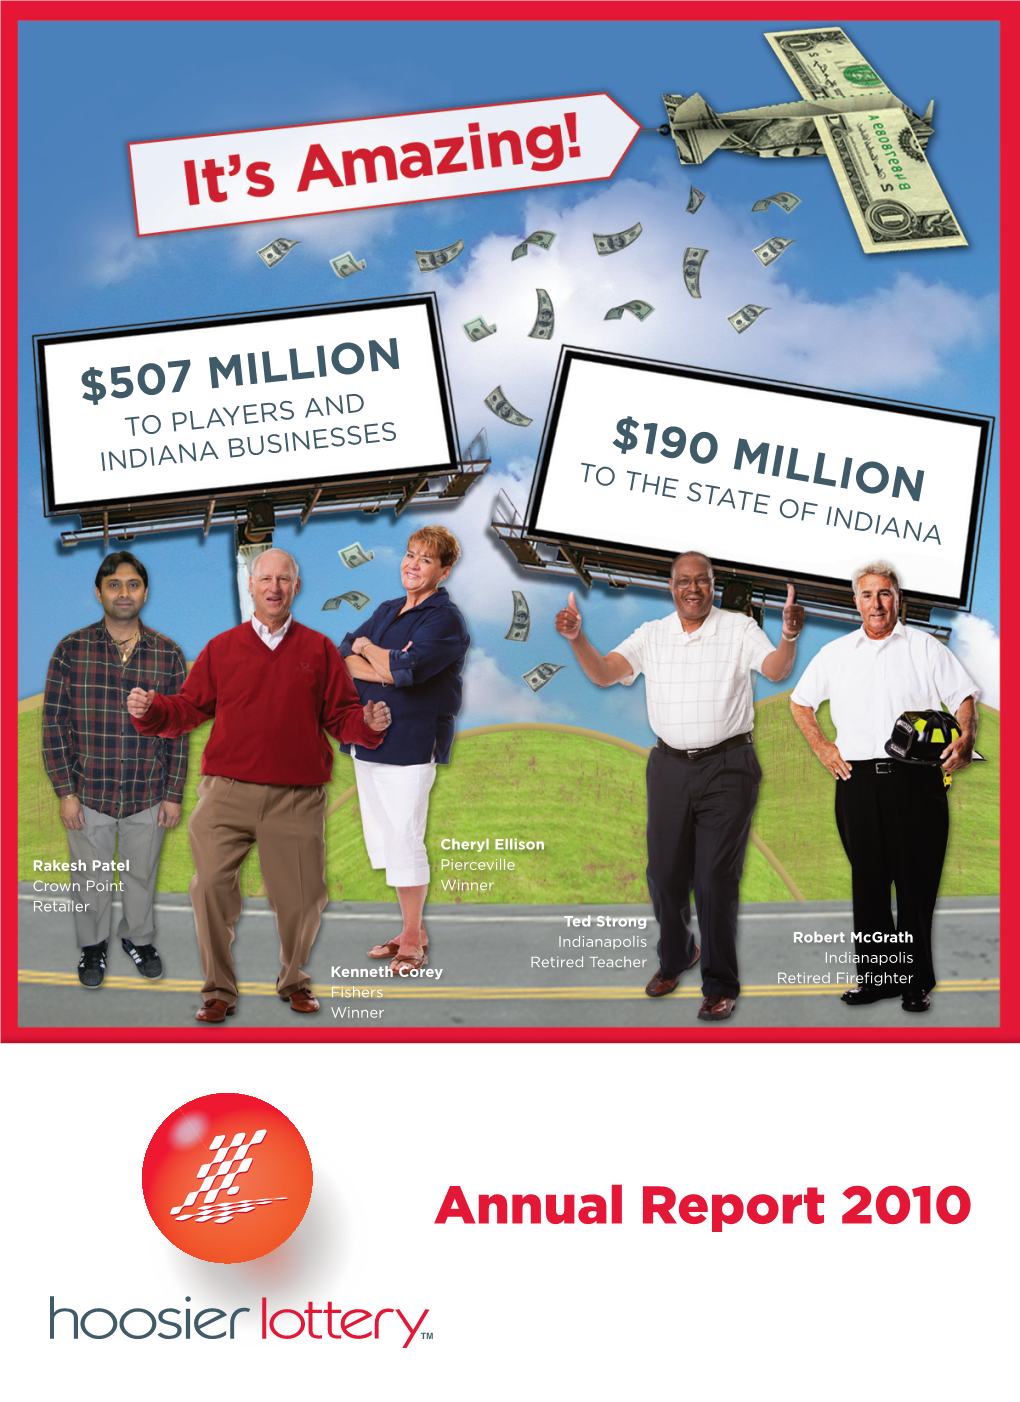 Annual Report 2010 from the Executive Director and the State Lottery Commission Chairperson